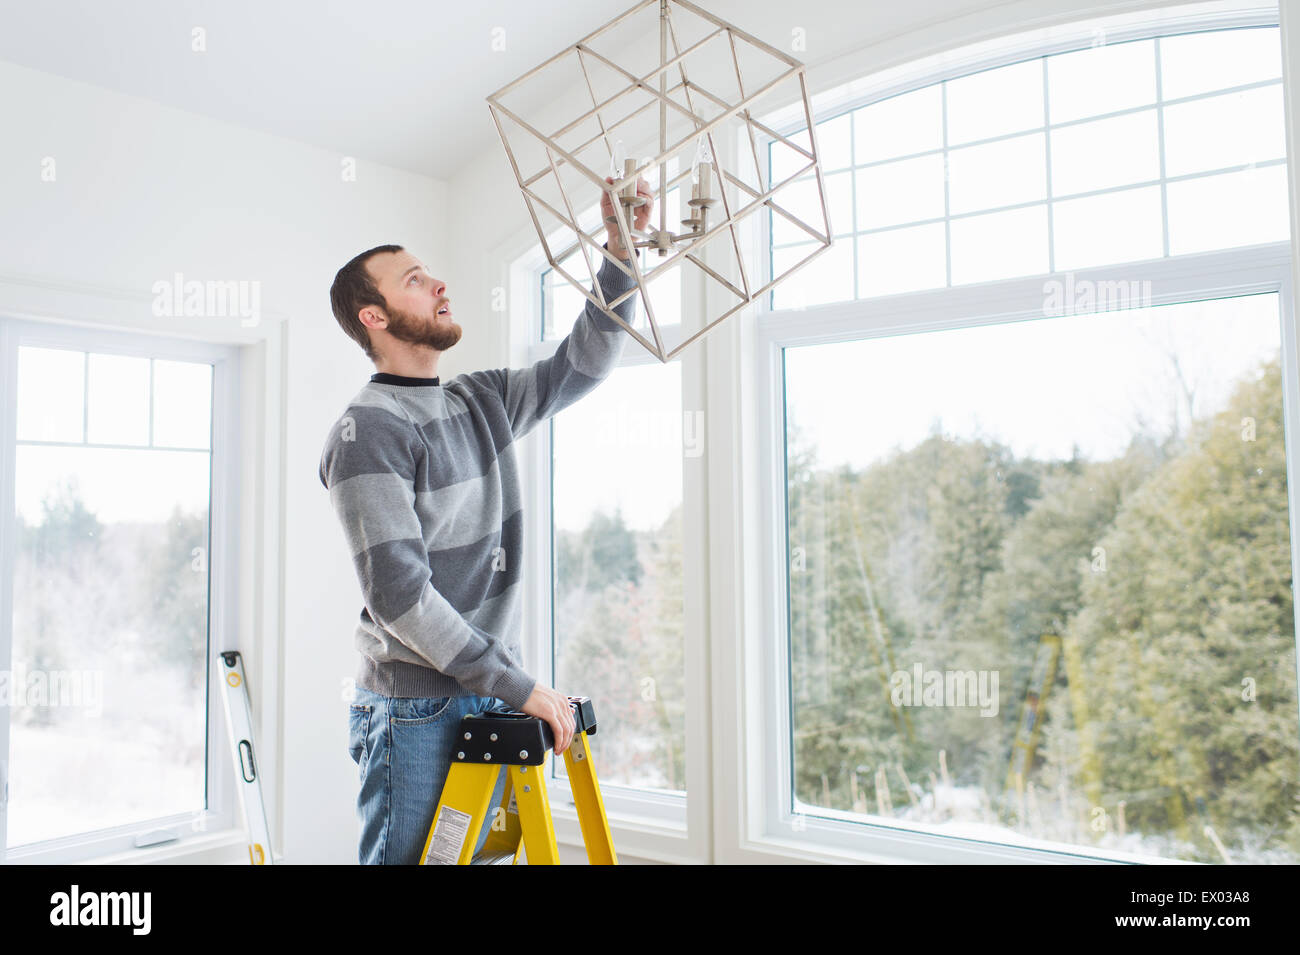 Young man installing ceiling light Stock Photo